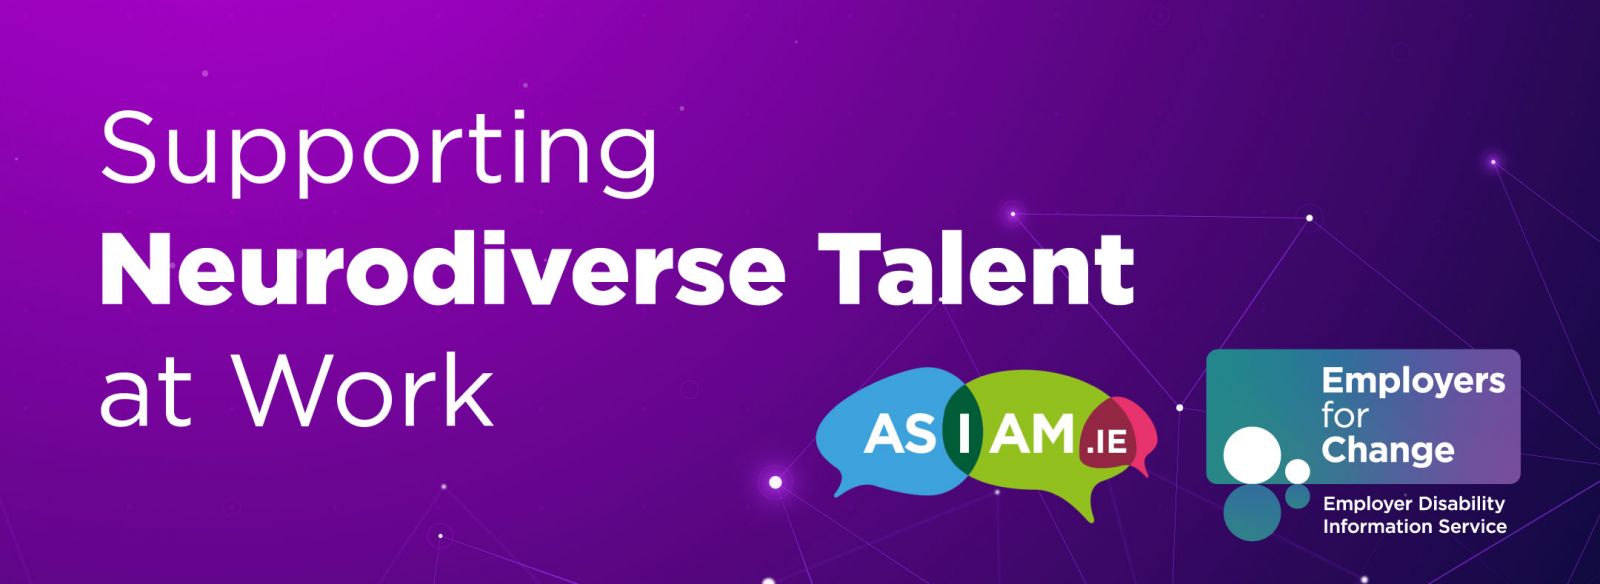 White text stating Supporting Neurodiverse Talent at Work on Thursday 7th of April at 12pm on a dark purple background with white abstract design. Logos for AsIAm and Employers for Change